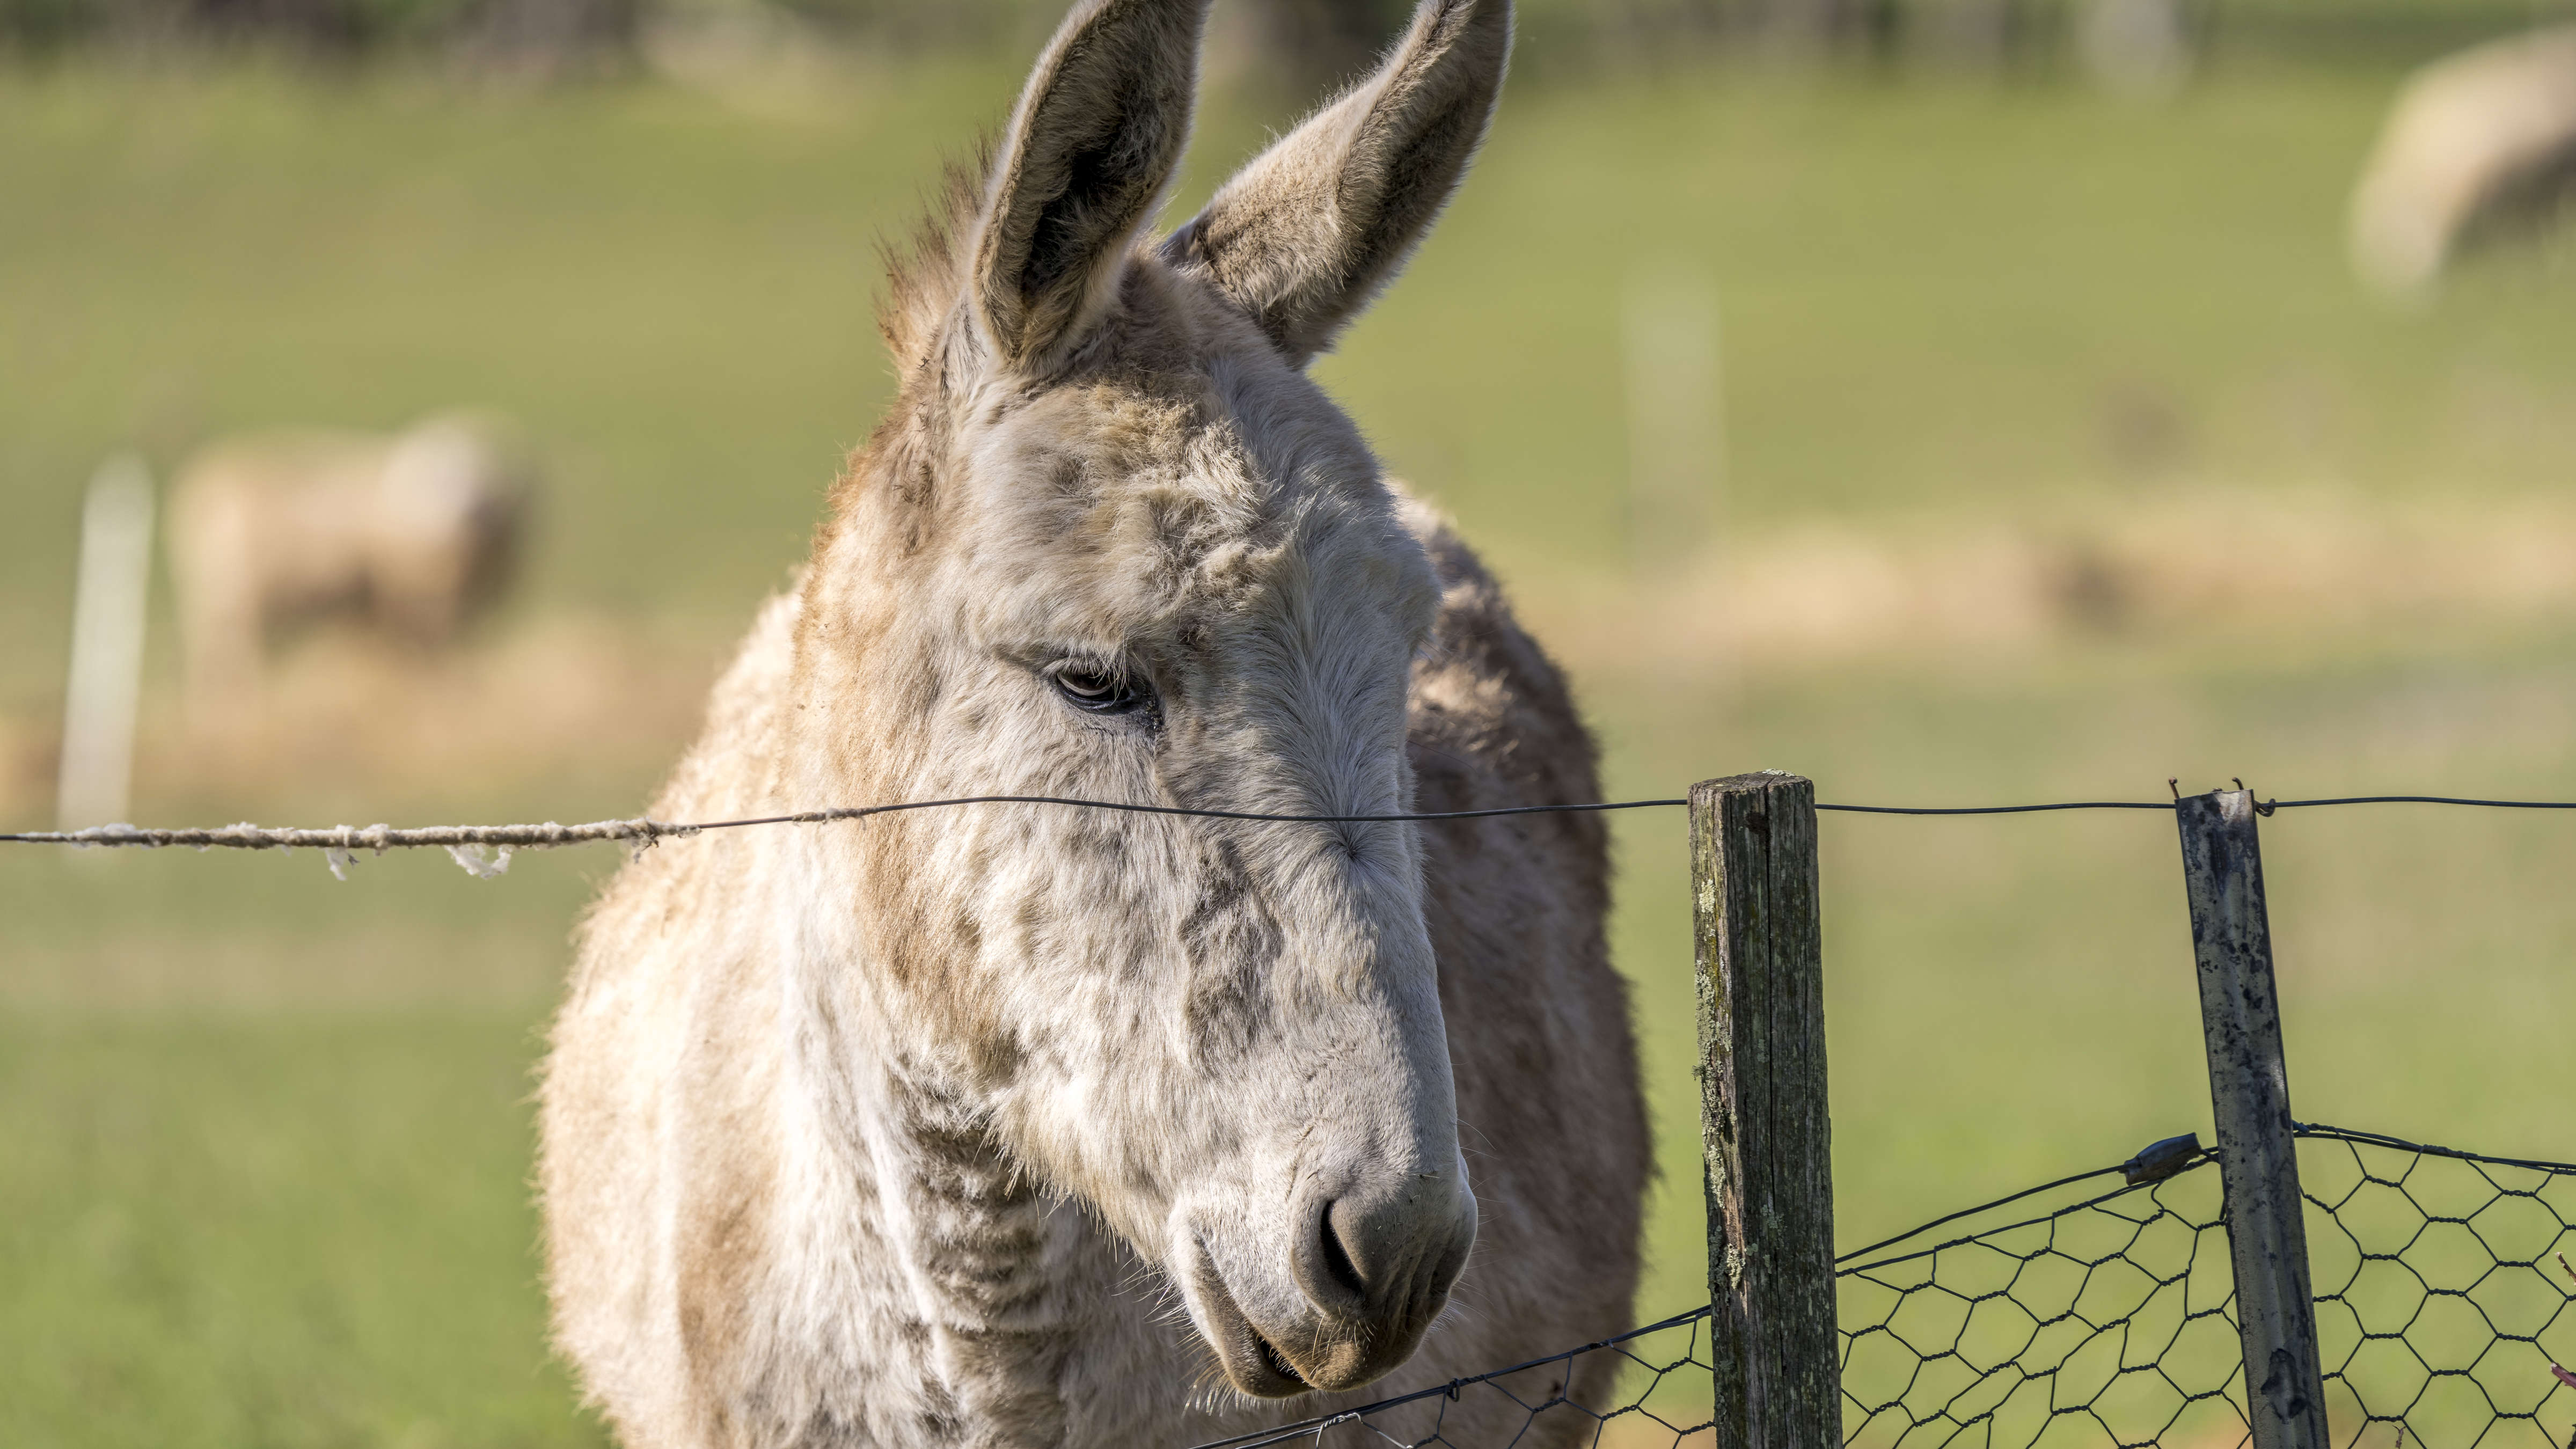 A grey donkey stands behind a wire fence and is looking into the distance with his ears erect. Photo: Rob Burnett.